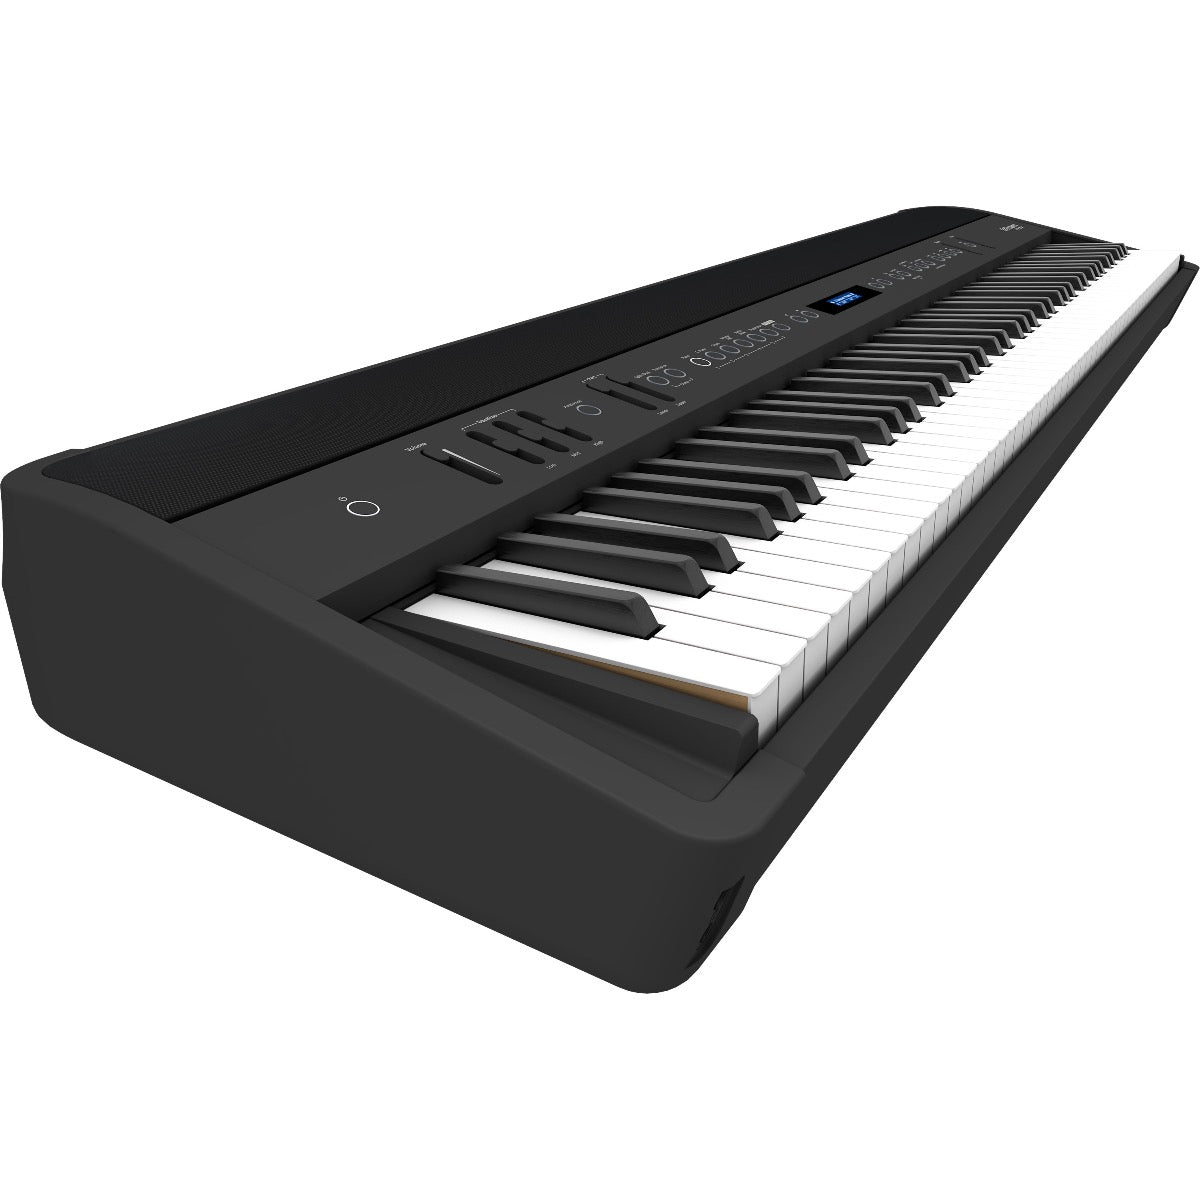 3/4 view of Roland FP-90X Digital Piano - Black showing left side, top and front